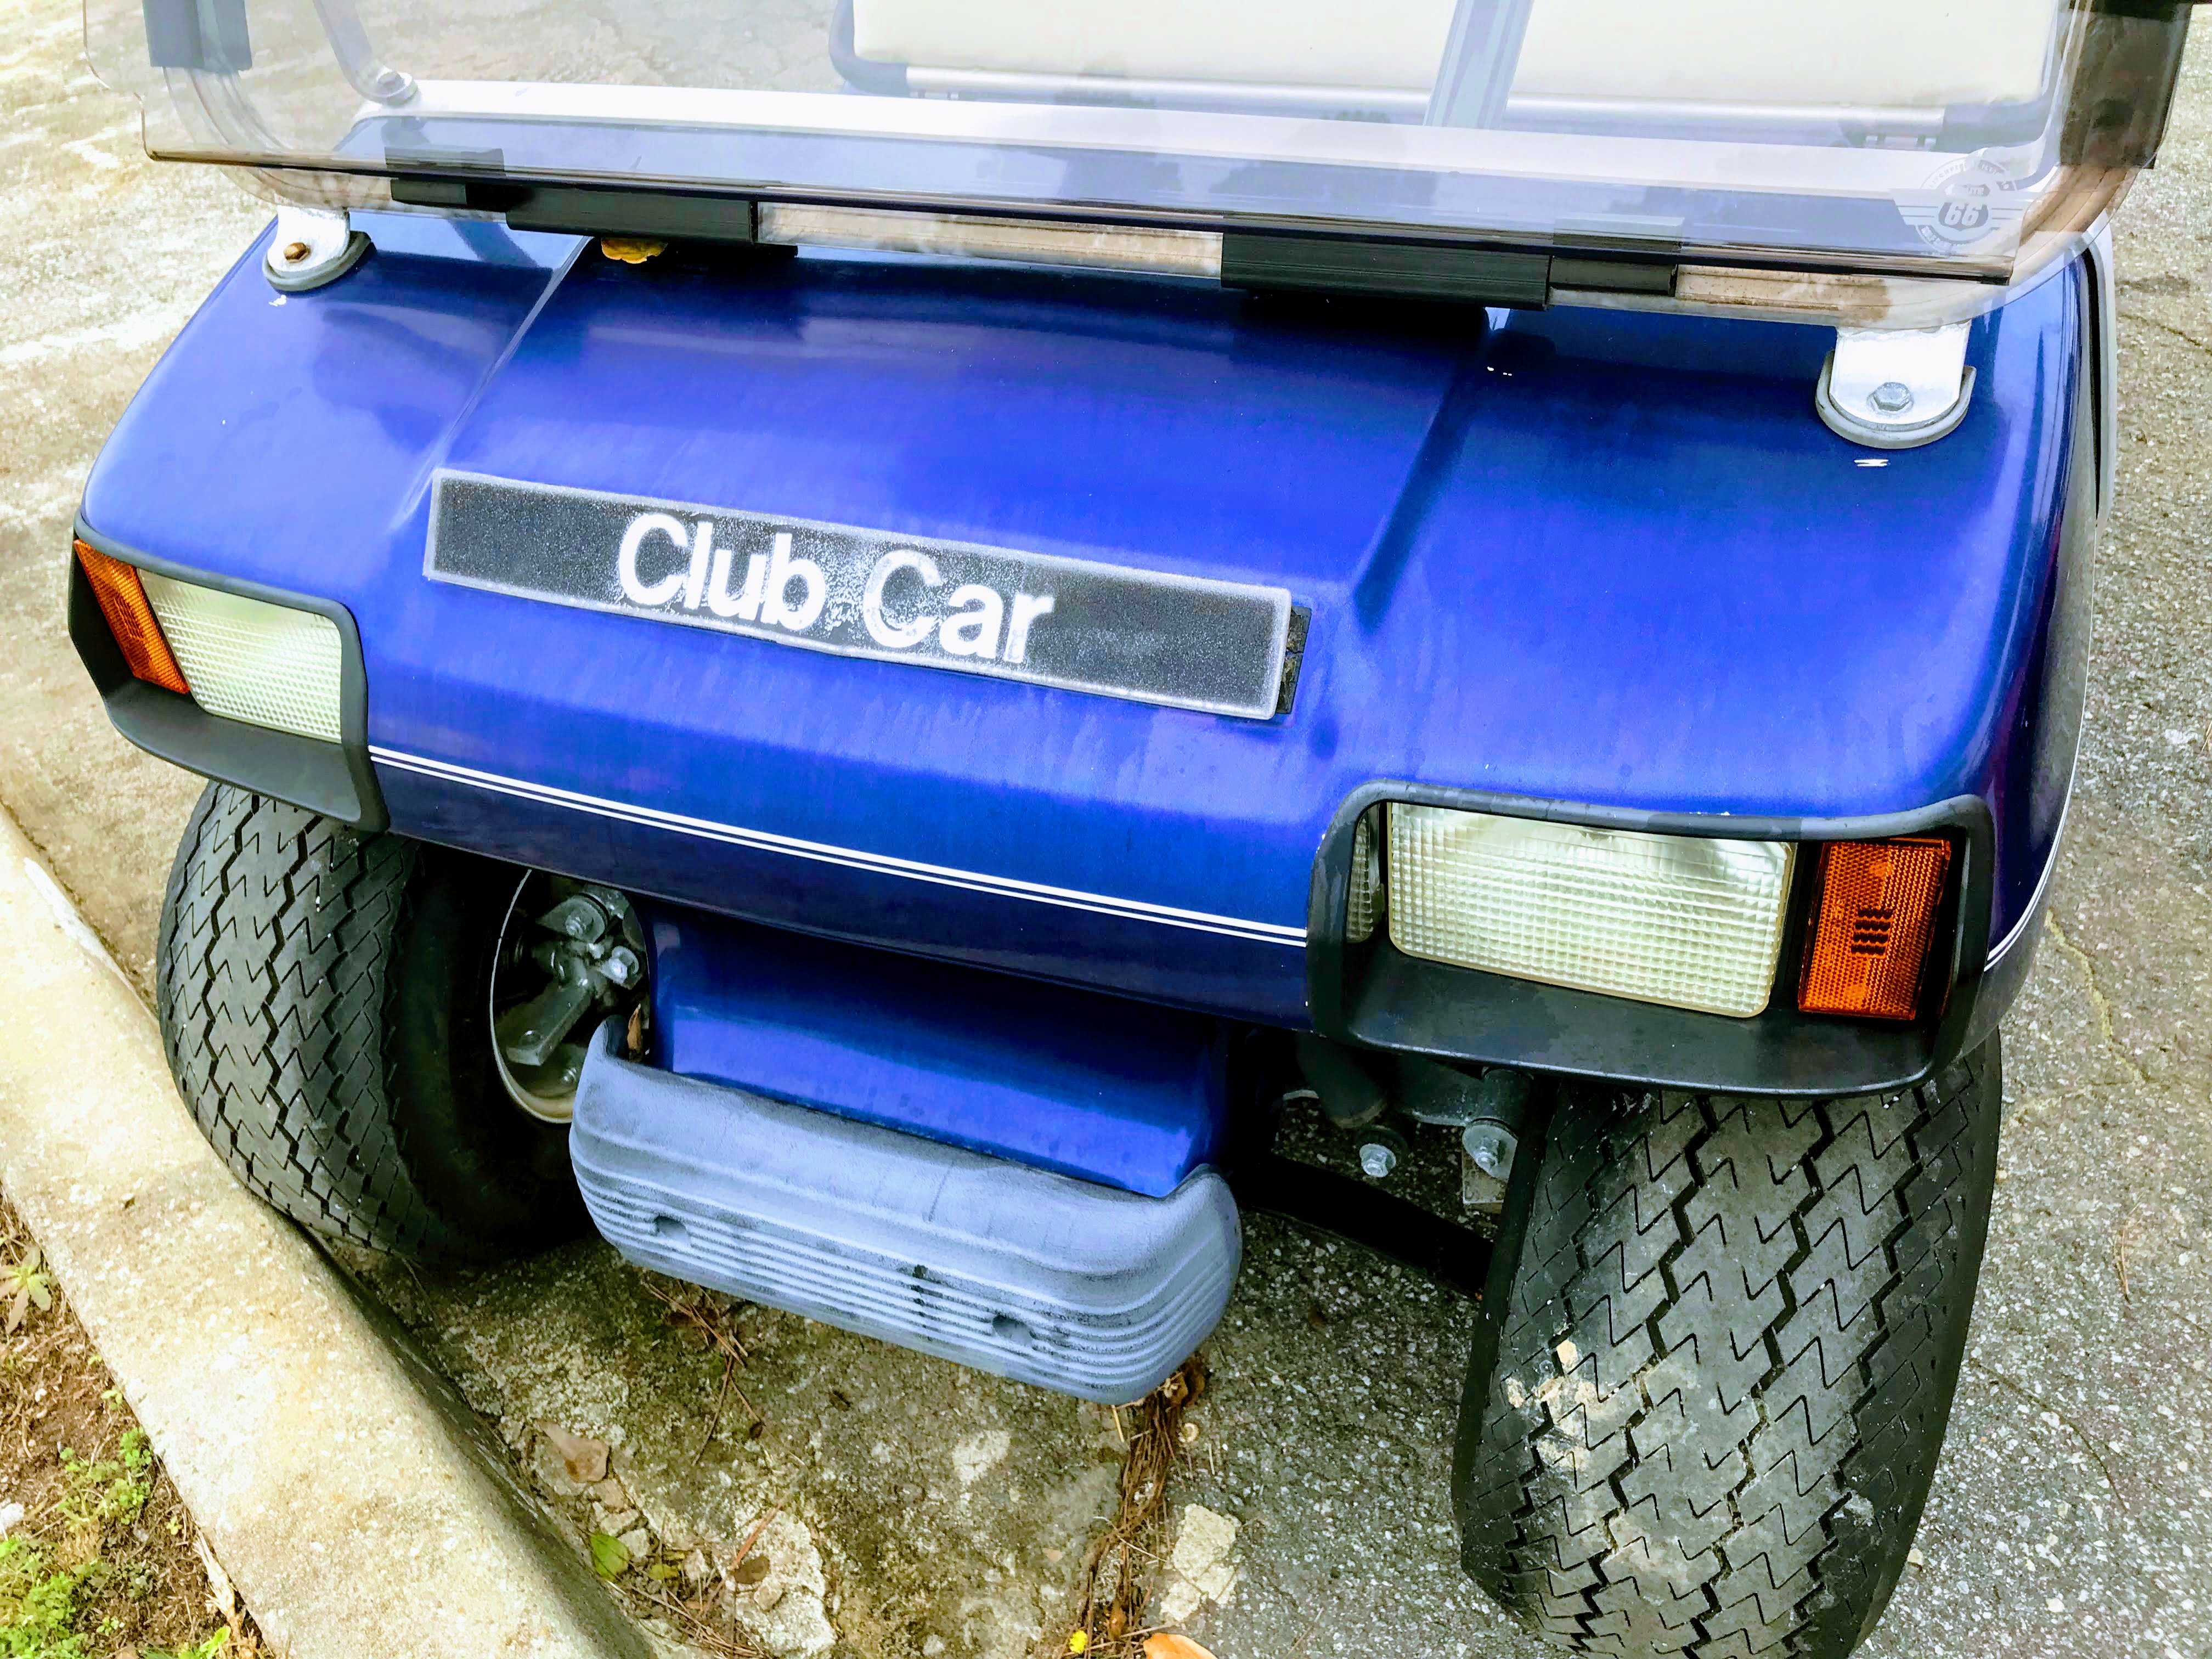 Finding Your Club Car Serial Number